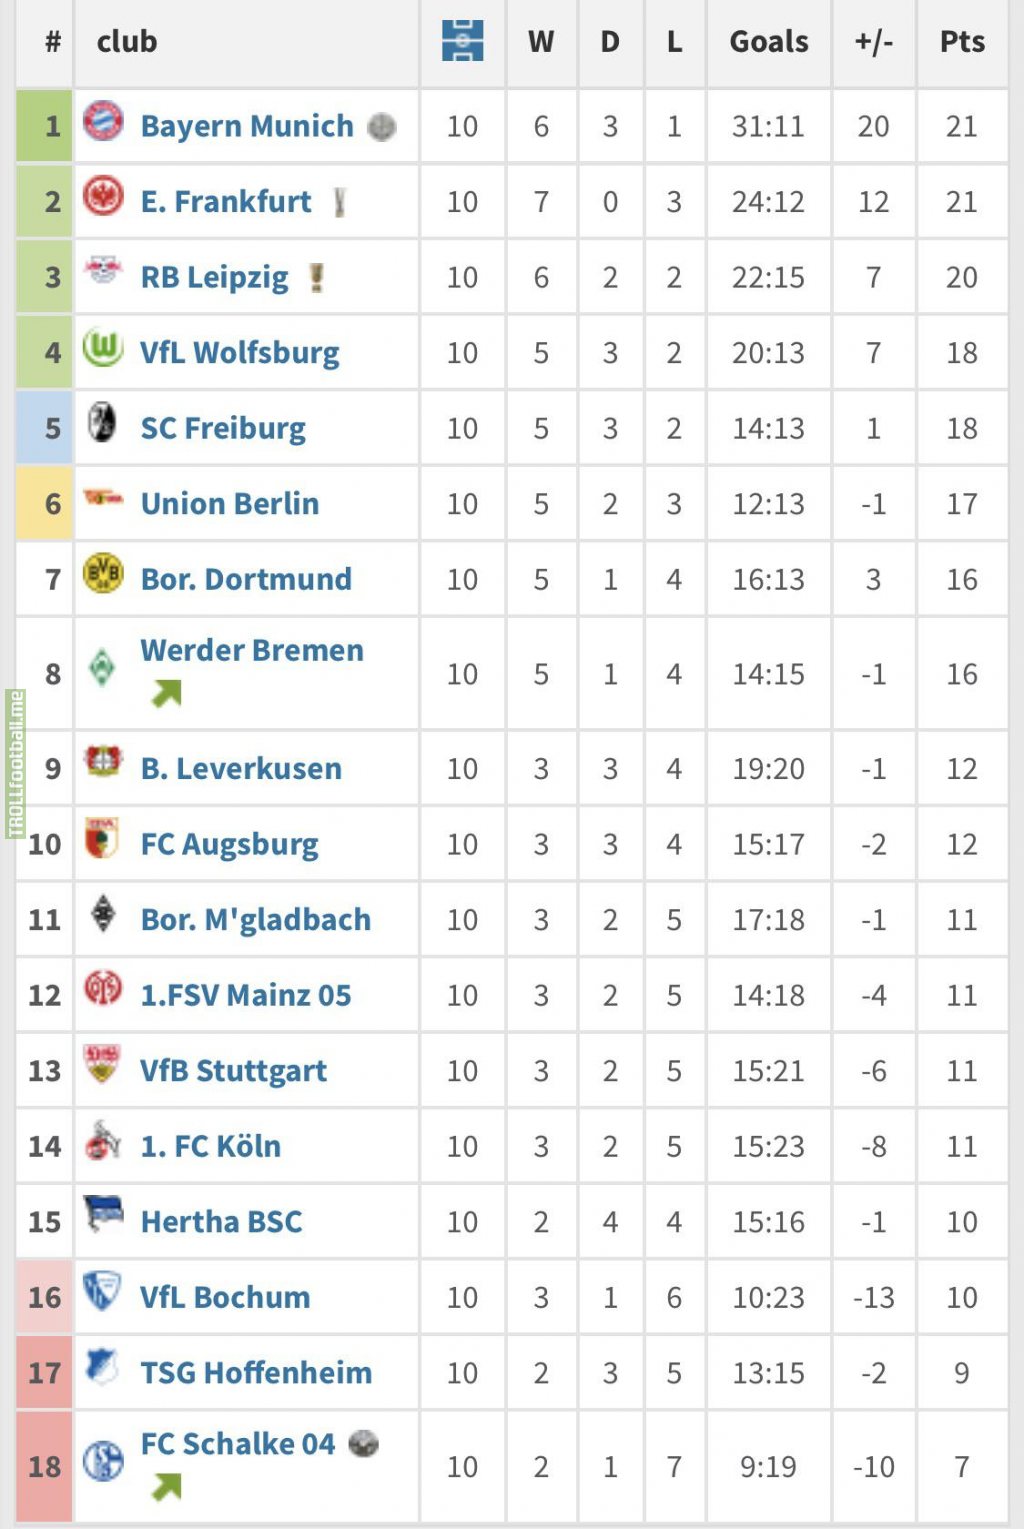 [1. Bundesliga] Form curve: table of the last 10 matchdays (5th - 14th matchday)